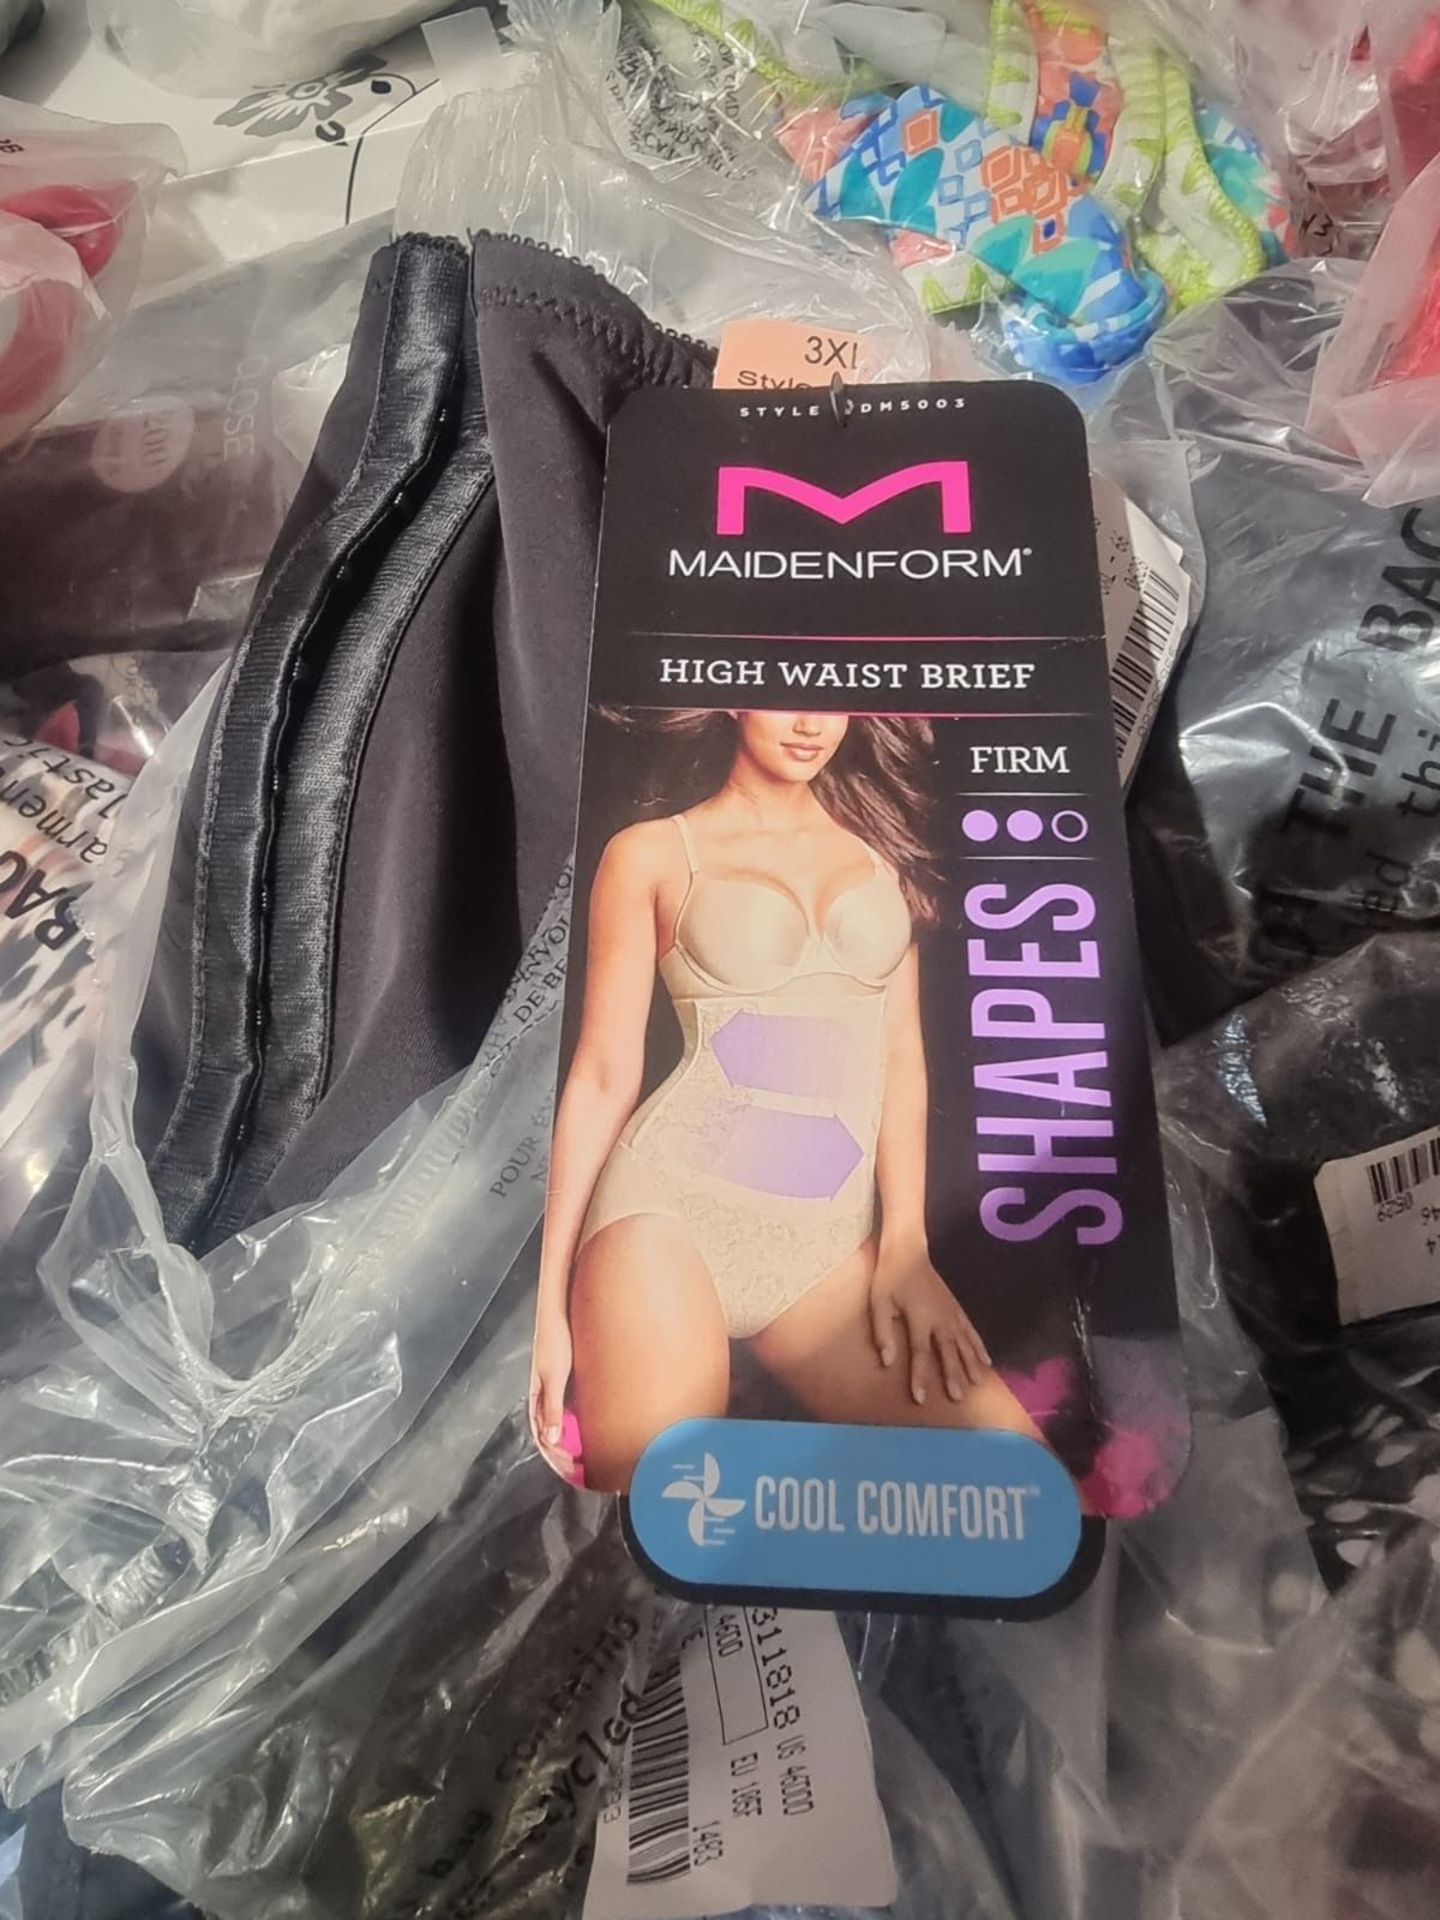 100 x NEW PACKAGED ASSORTED SWIM & UNDERWEAR FROM BRAND SUCH AS WONDERBRA, BOUX AVENUE, ANN SUMMERS, - Image 7 of 53